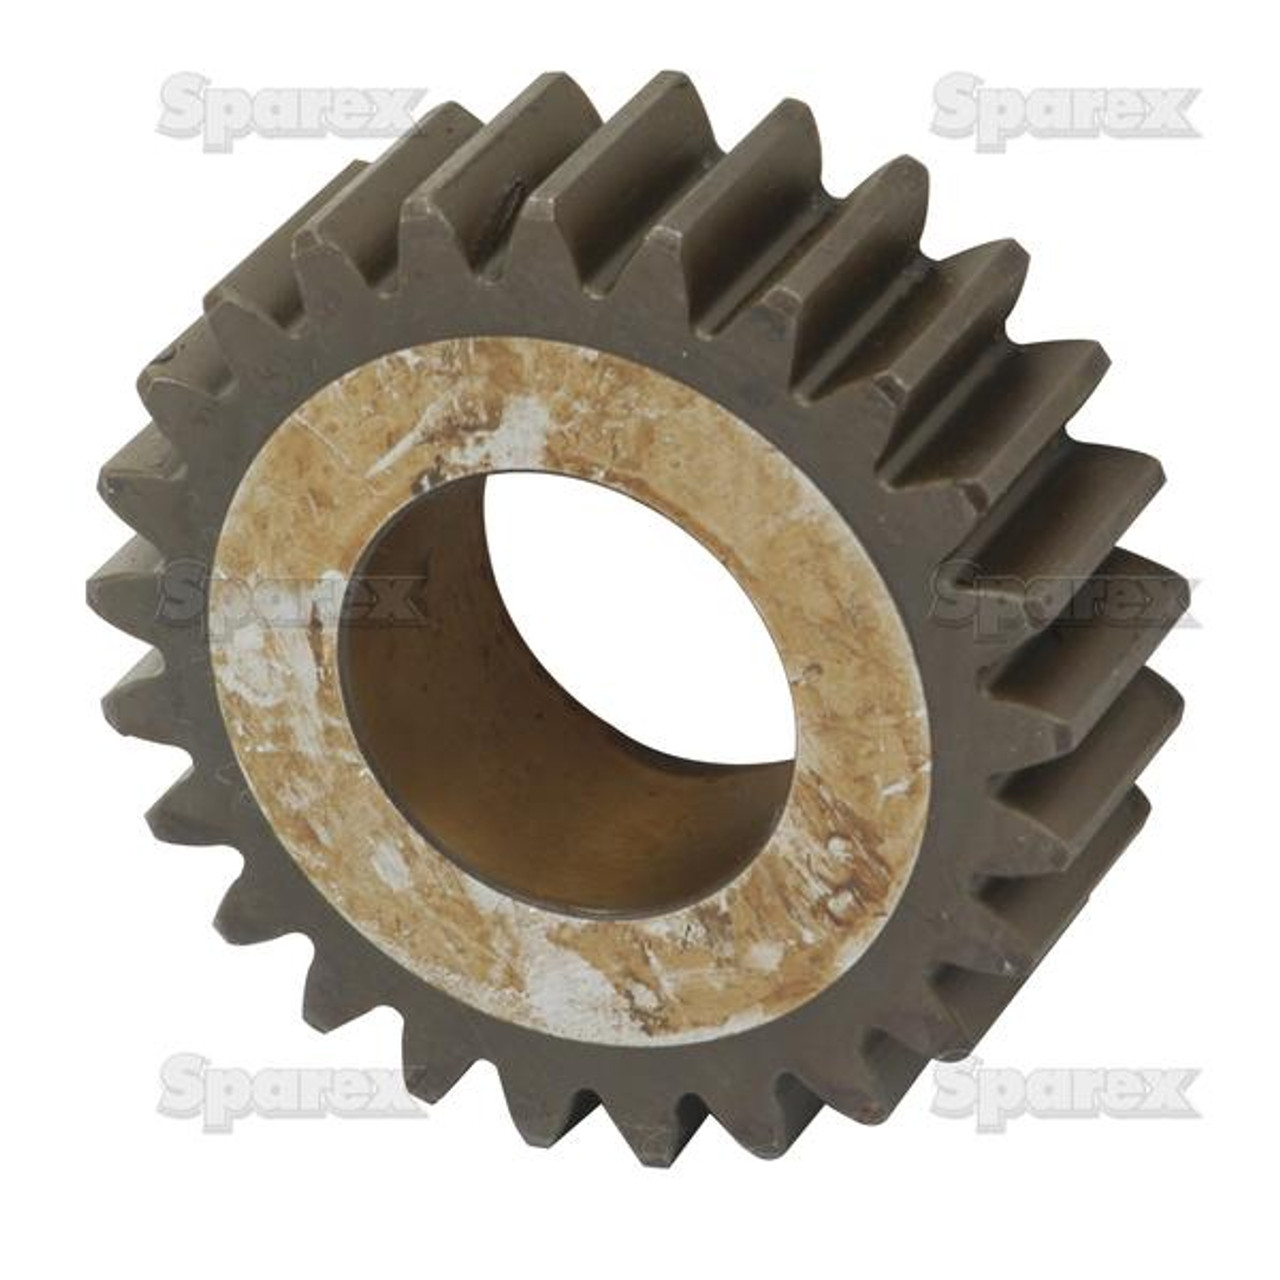 Tractor  GEAR, PLANETARY, 5145497 Part Number S7741